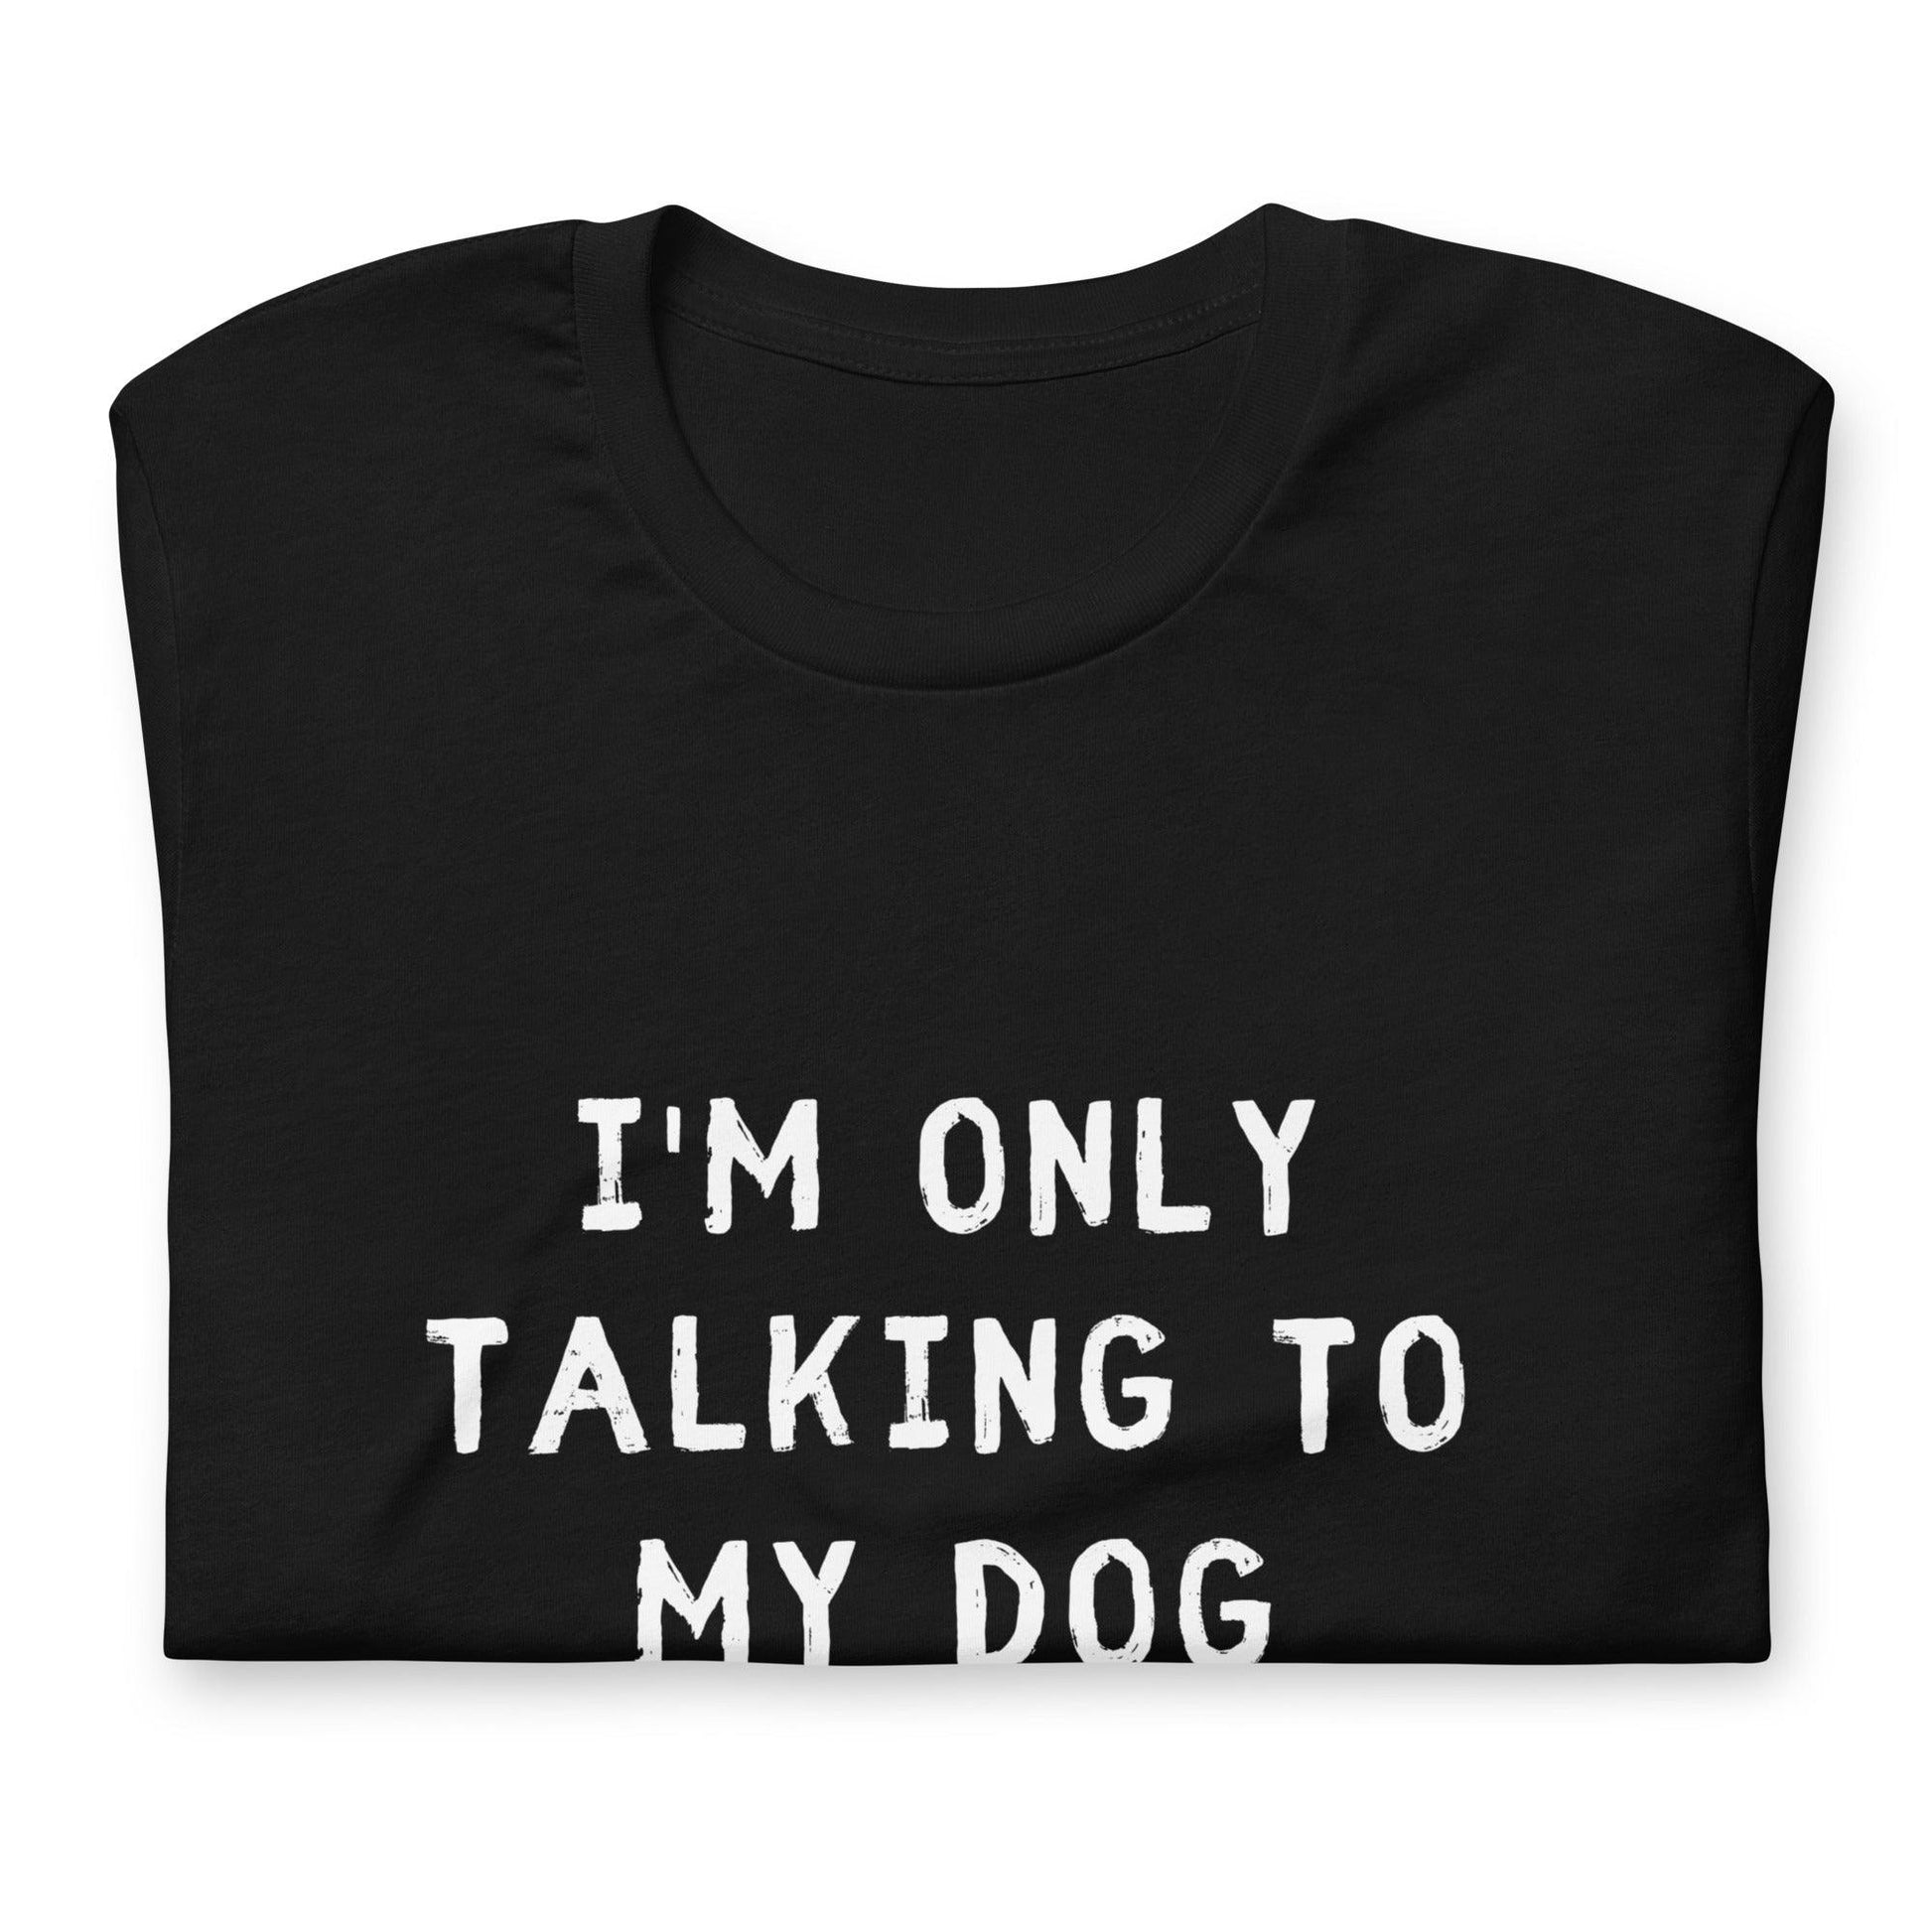 I'm Only Talking To My Dog Today Unisex T-Shirt - TheGivenGet